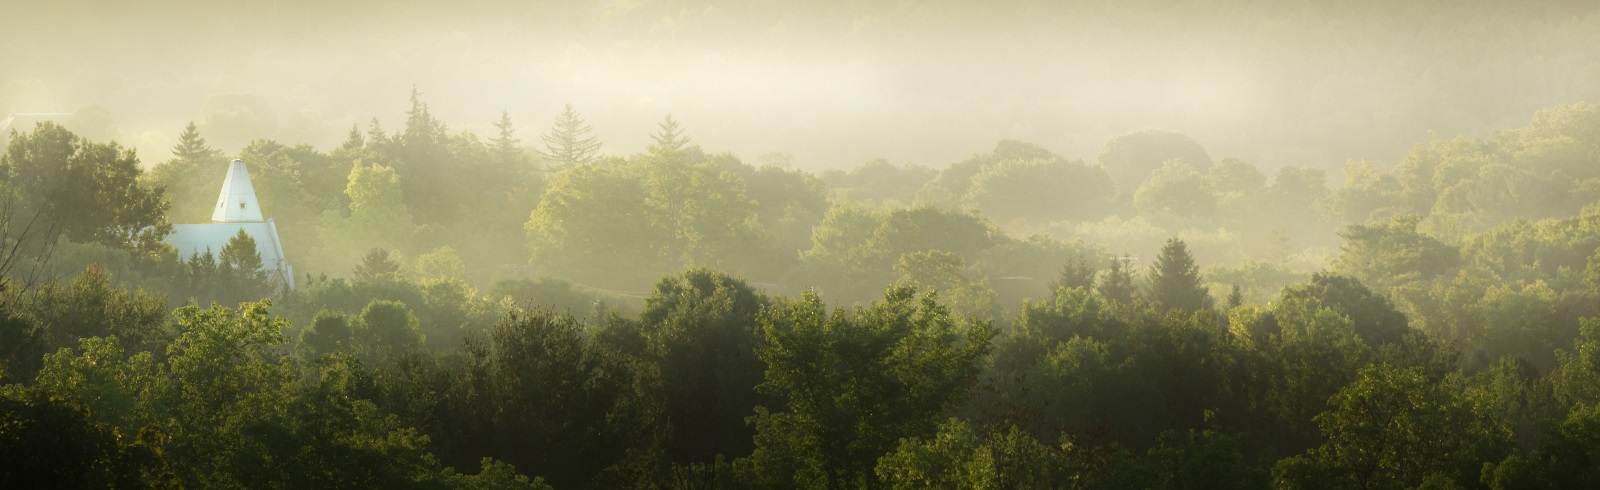 a landscape of trees with mist above them